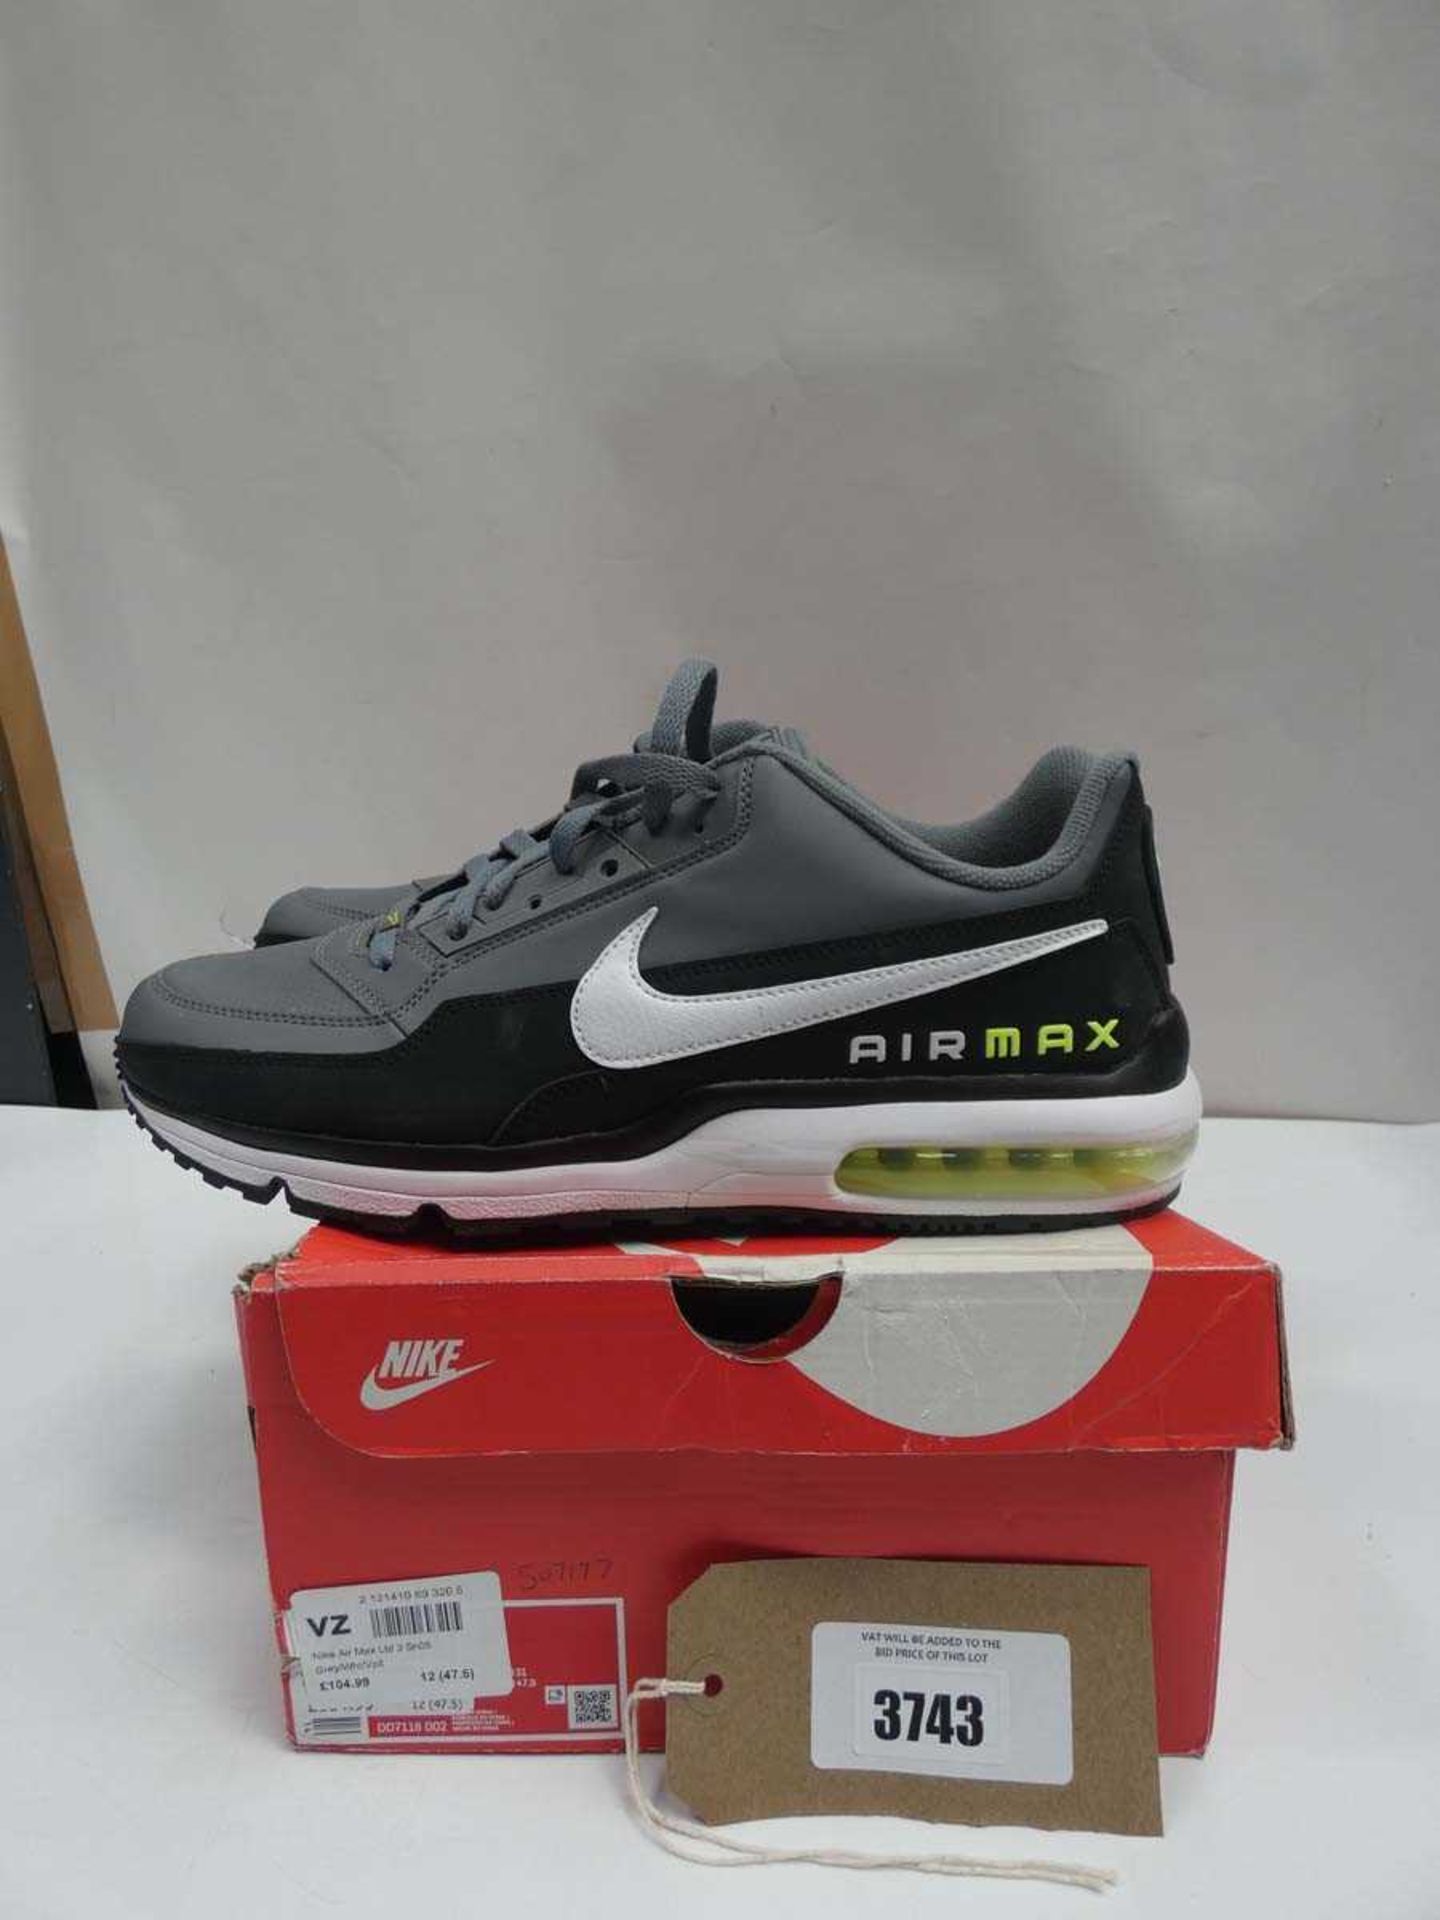 +VAT Nike Air Max trainers size 12